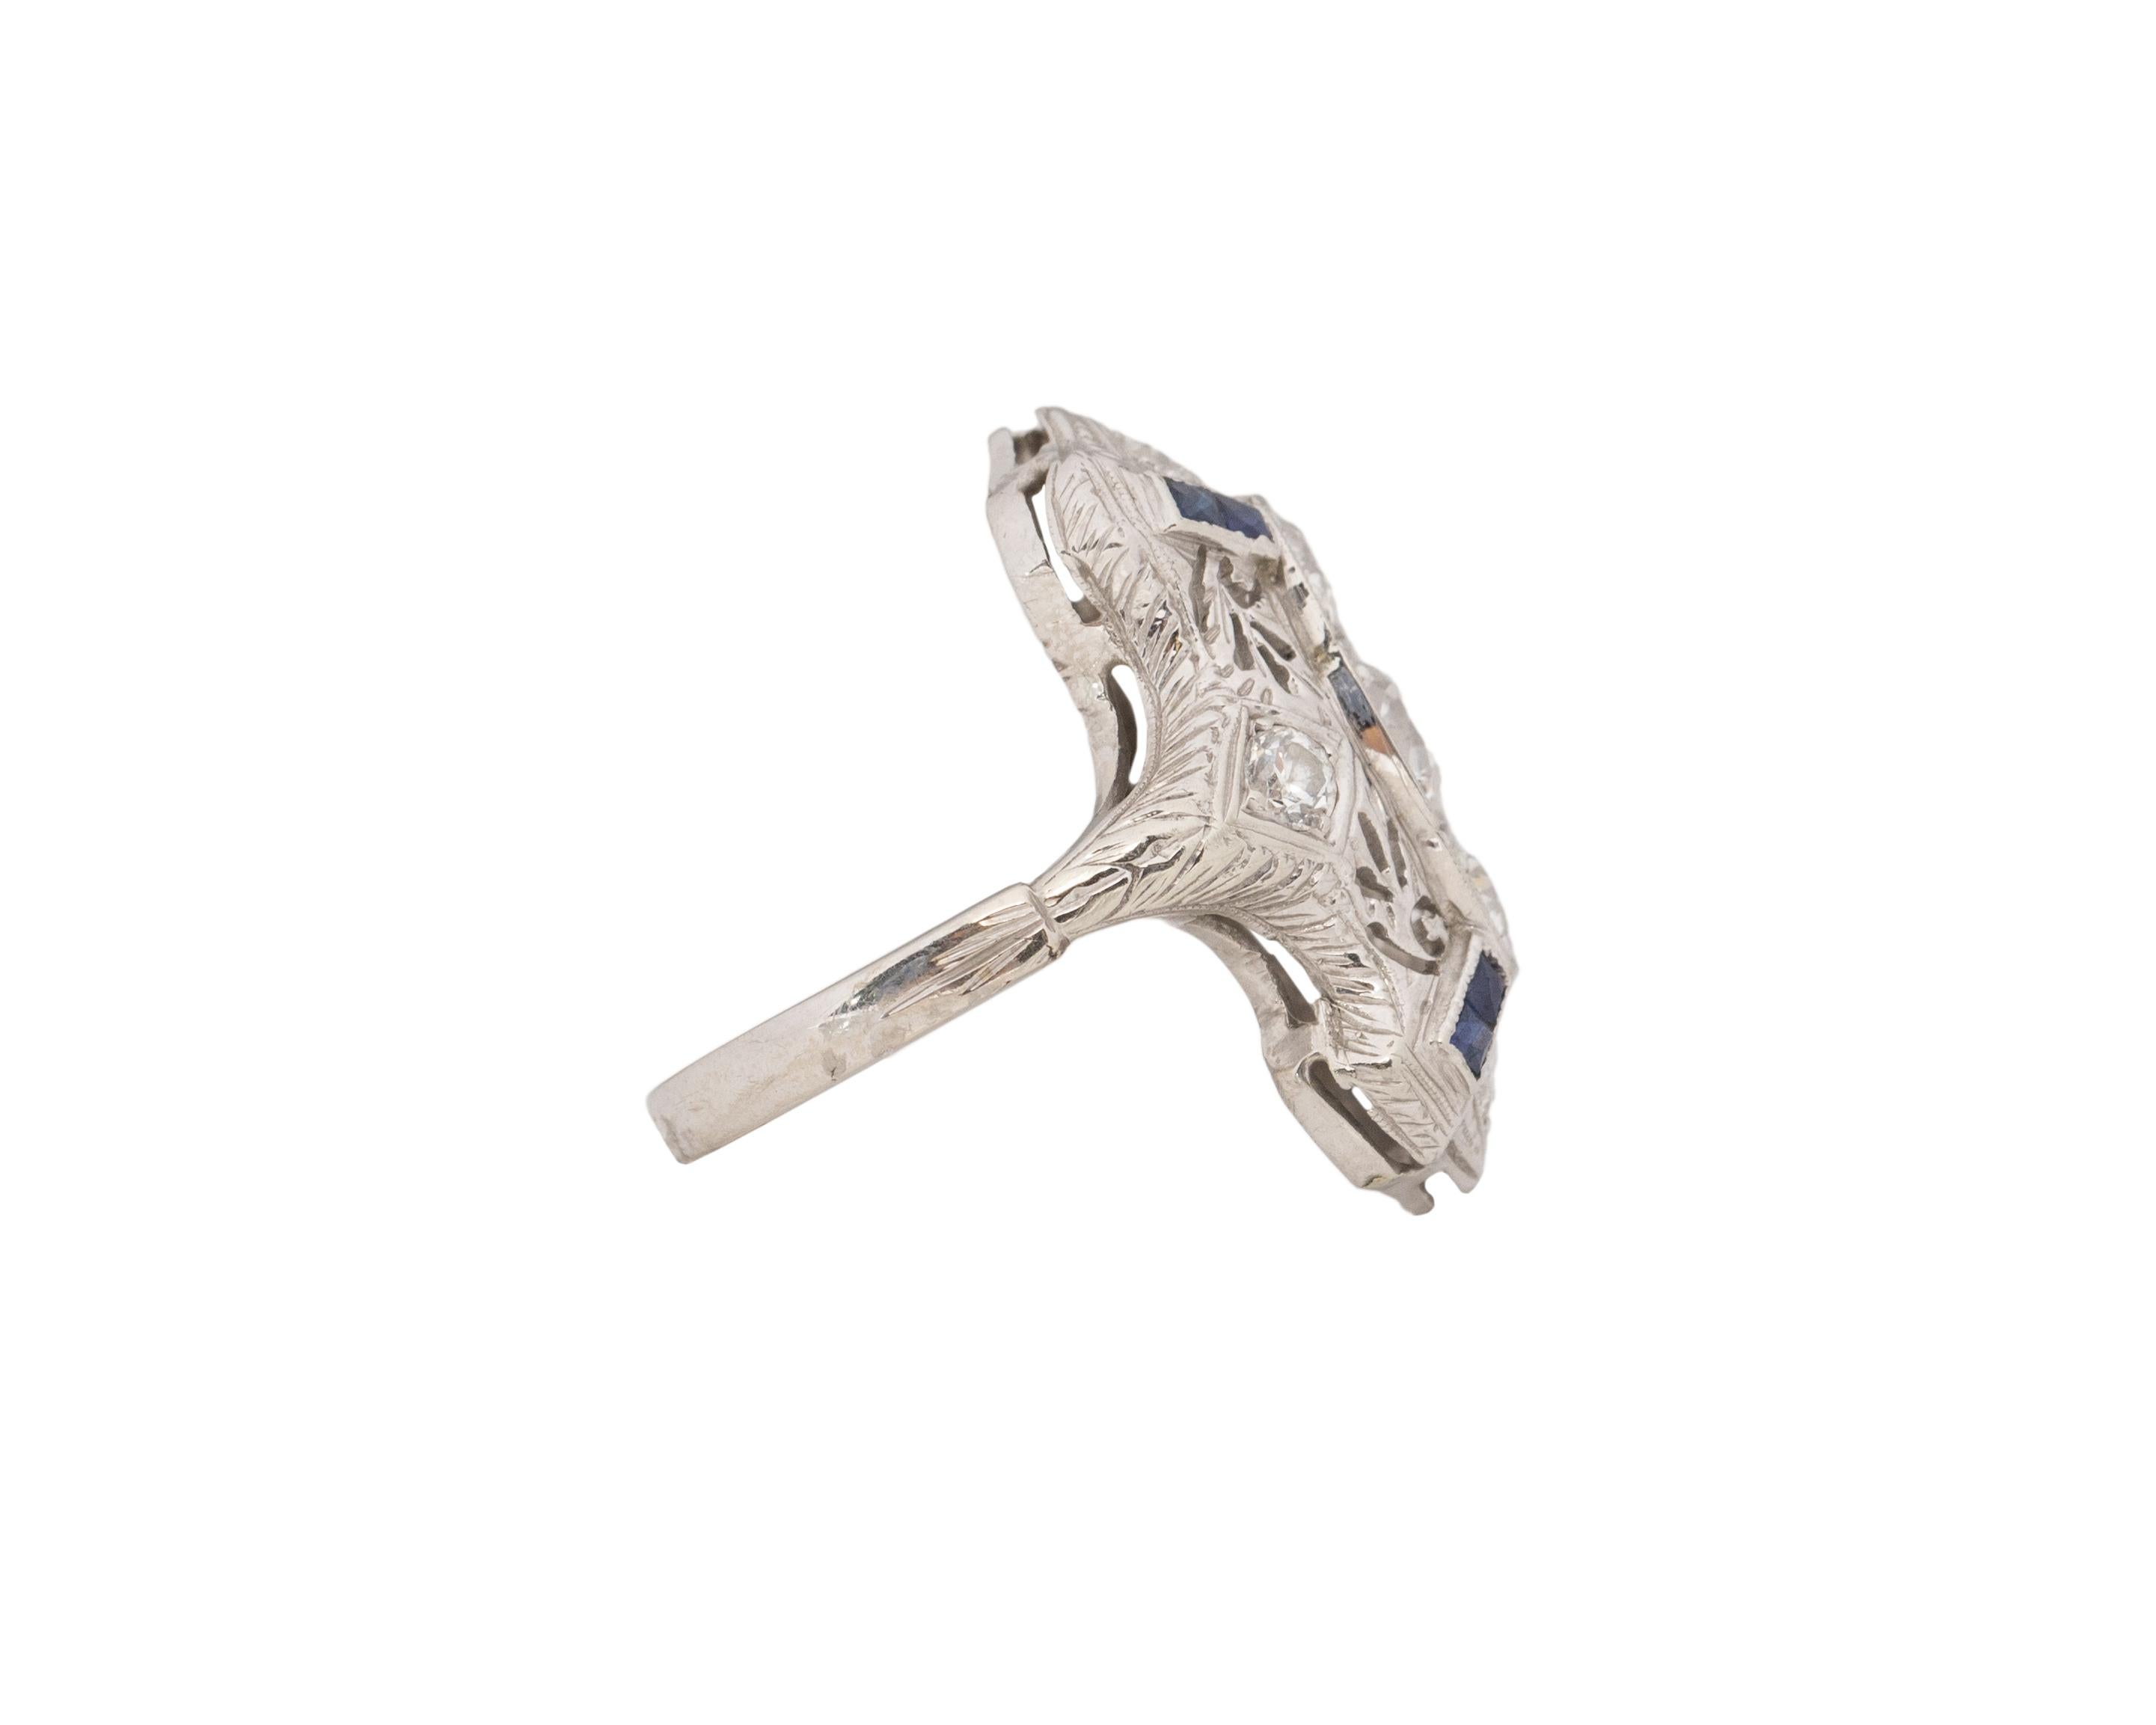 Item Details: 
Ring Size: 6
Metal Type: Platinum  [Hallmarked, and Tested]
Weight:  5.0 grams

Diamond Details:
Weight: .85ct, total weight
Cut: Old European brilliant
Color: G-H
Clarity: VS/SI

Finger to Top of Stone Measurement: 5mm
Band/Shank